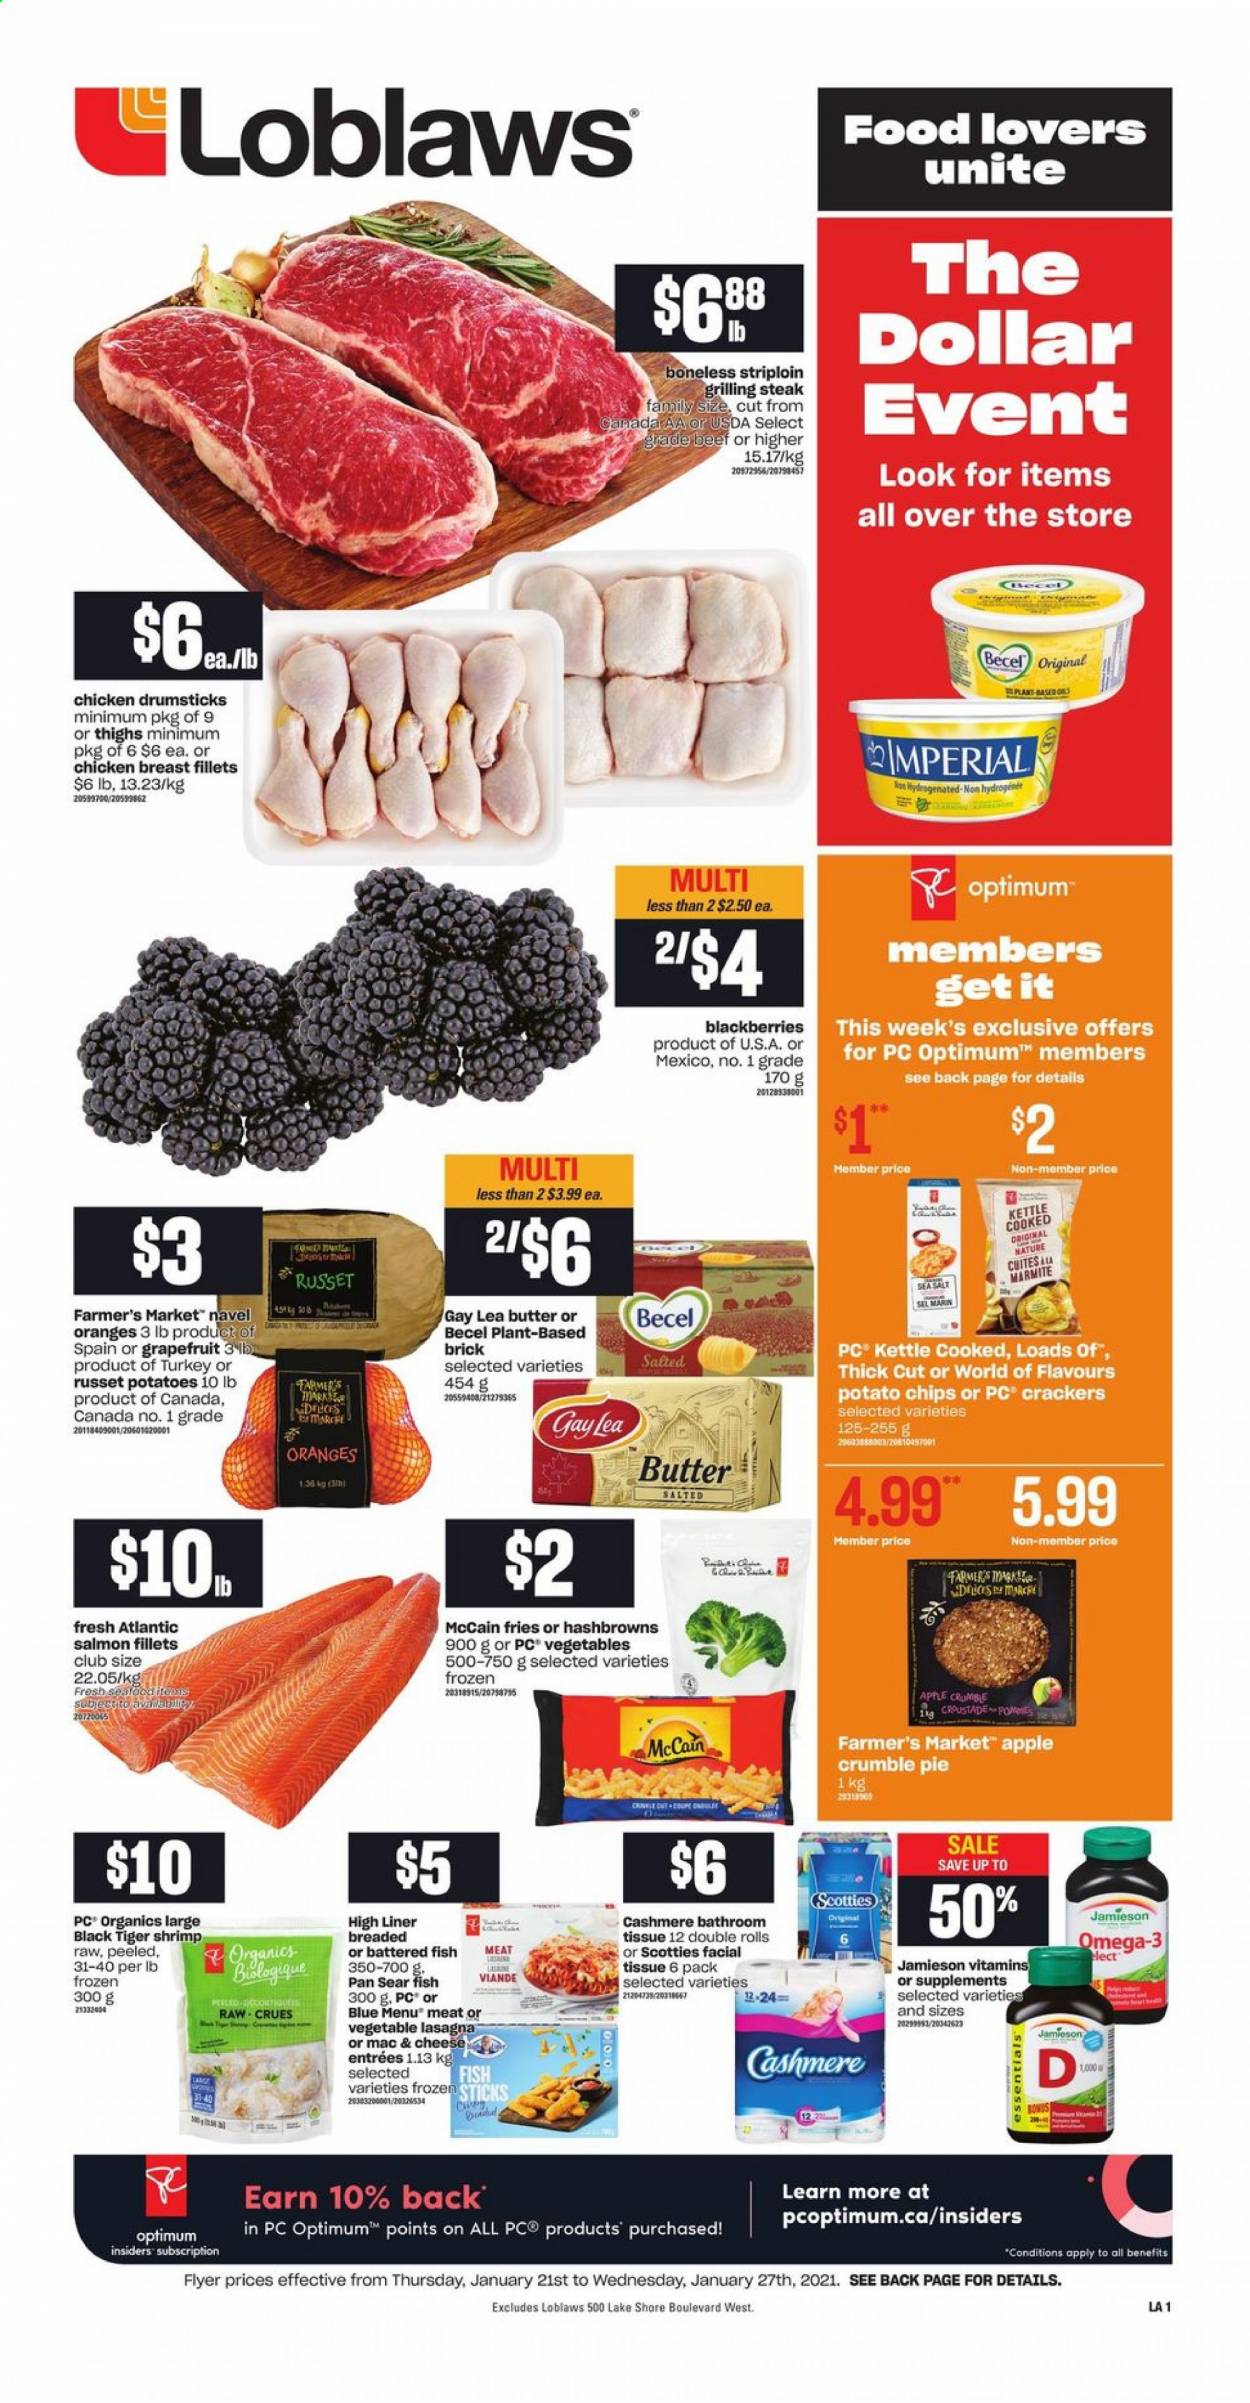 thumbnail - Loblaws Flyer - January 21, 2021 - January 27, 2021 - Sales products - pie, russet potatoes, blackberries, grapefruits, navel oranges, salmon, salmon fillet, fish, shrimps, lasagna meal, butter, McCain, hash browns, potato fries, crinkle fries, crackers, potato chips, chicken drumsticks, chicken, bath tissue, Optimum, Omega-3, steak. Page 1.